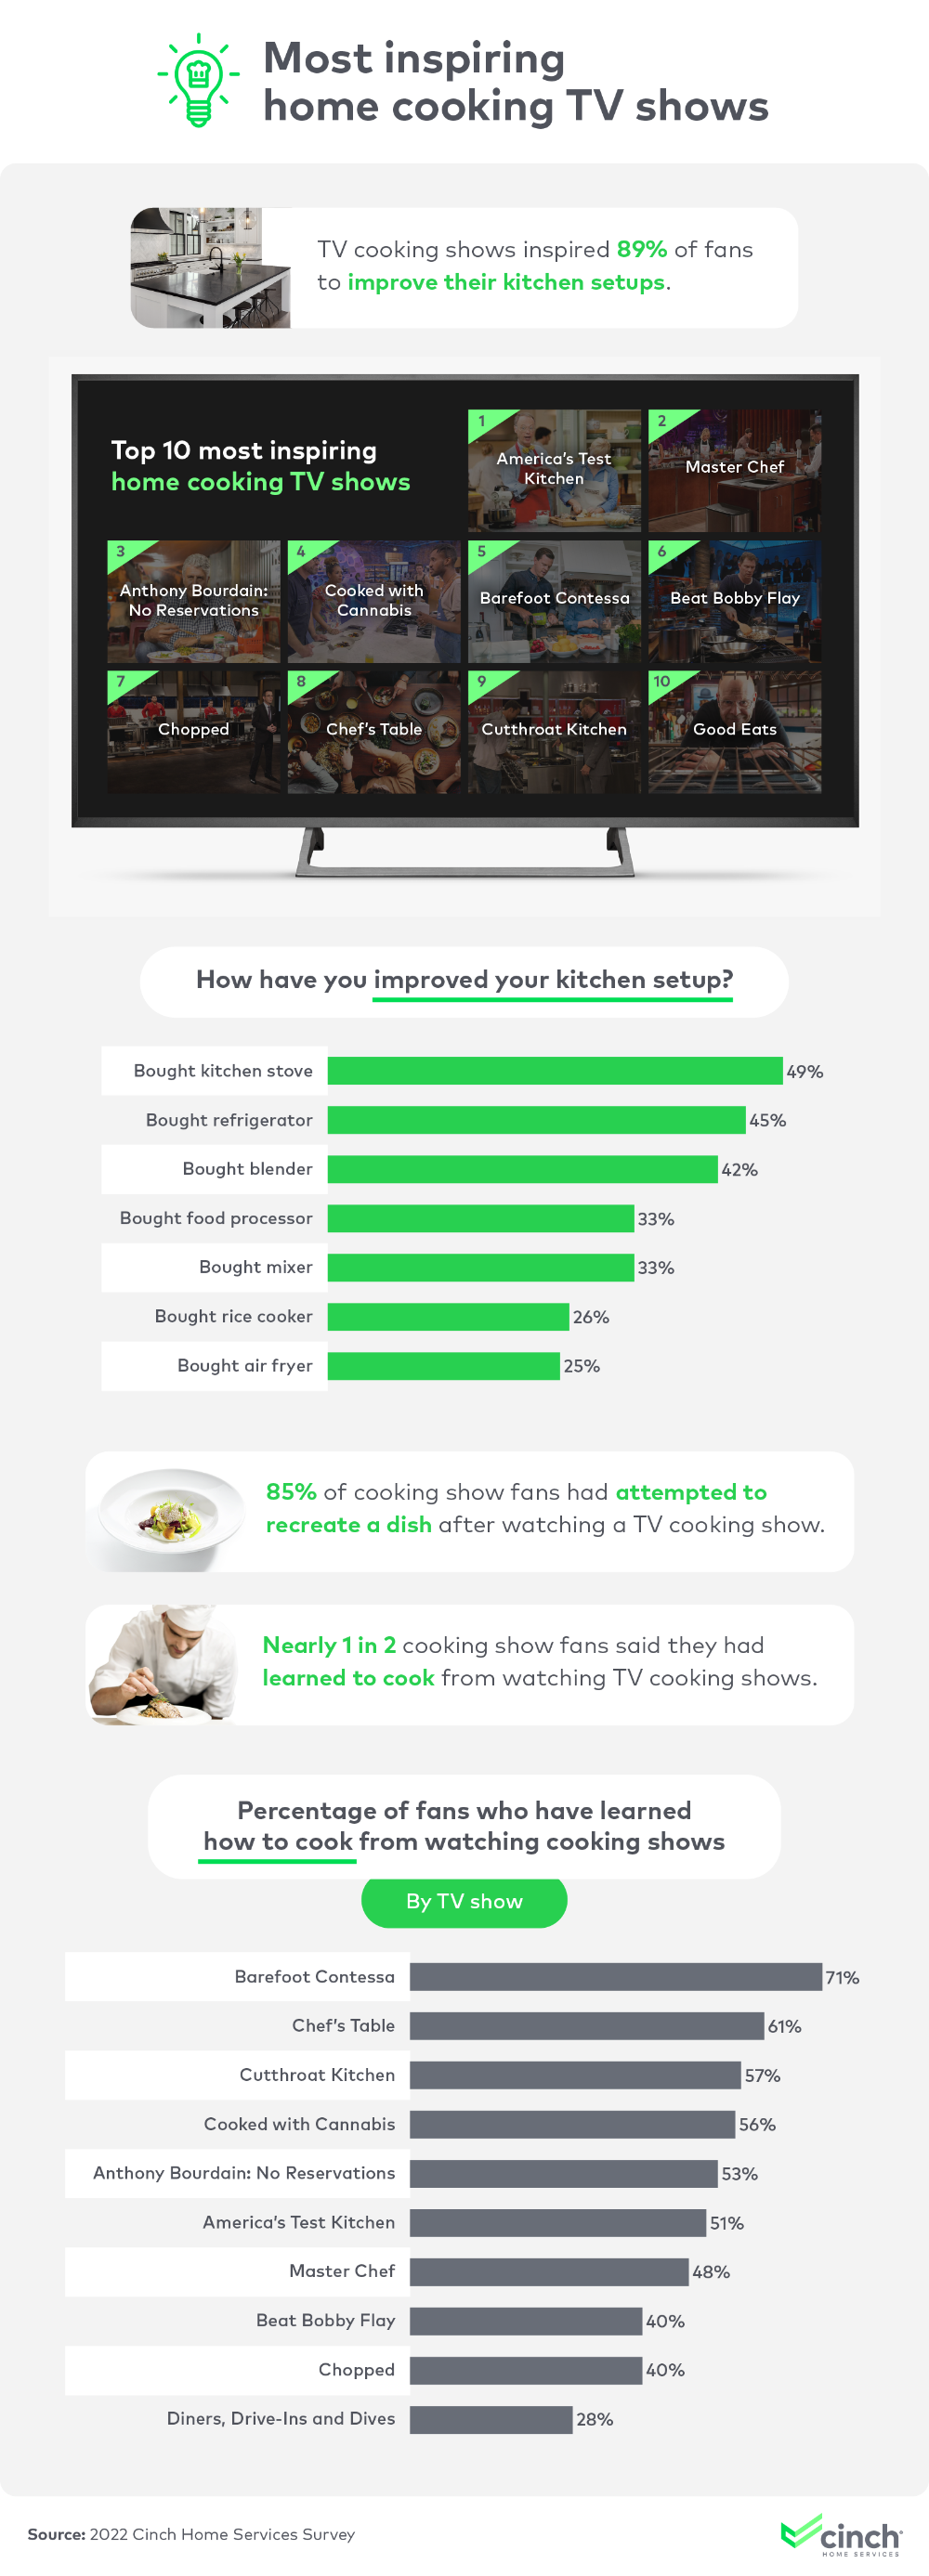 Infographic that explores the most inspiring home cooking TV shows and how they have inspired fans.